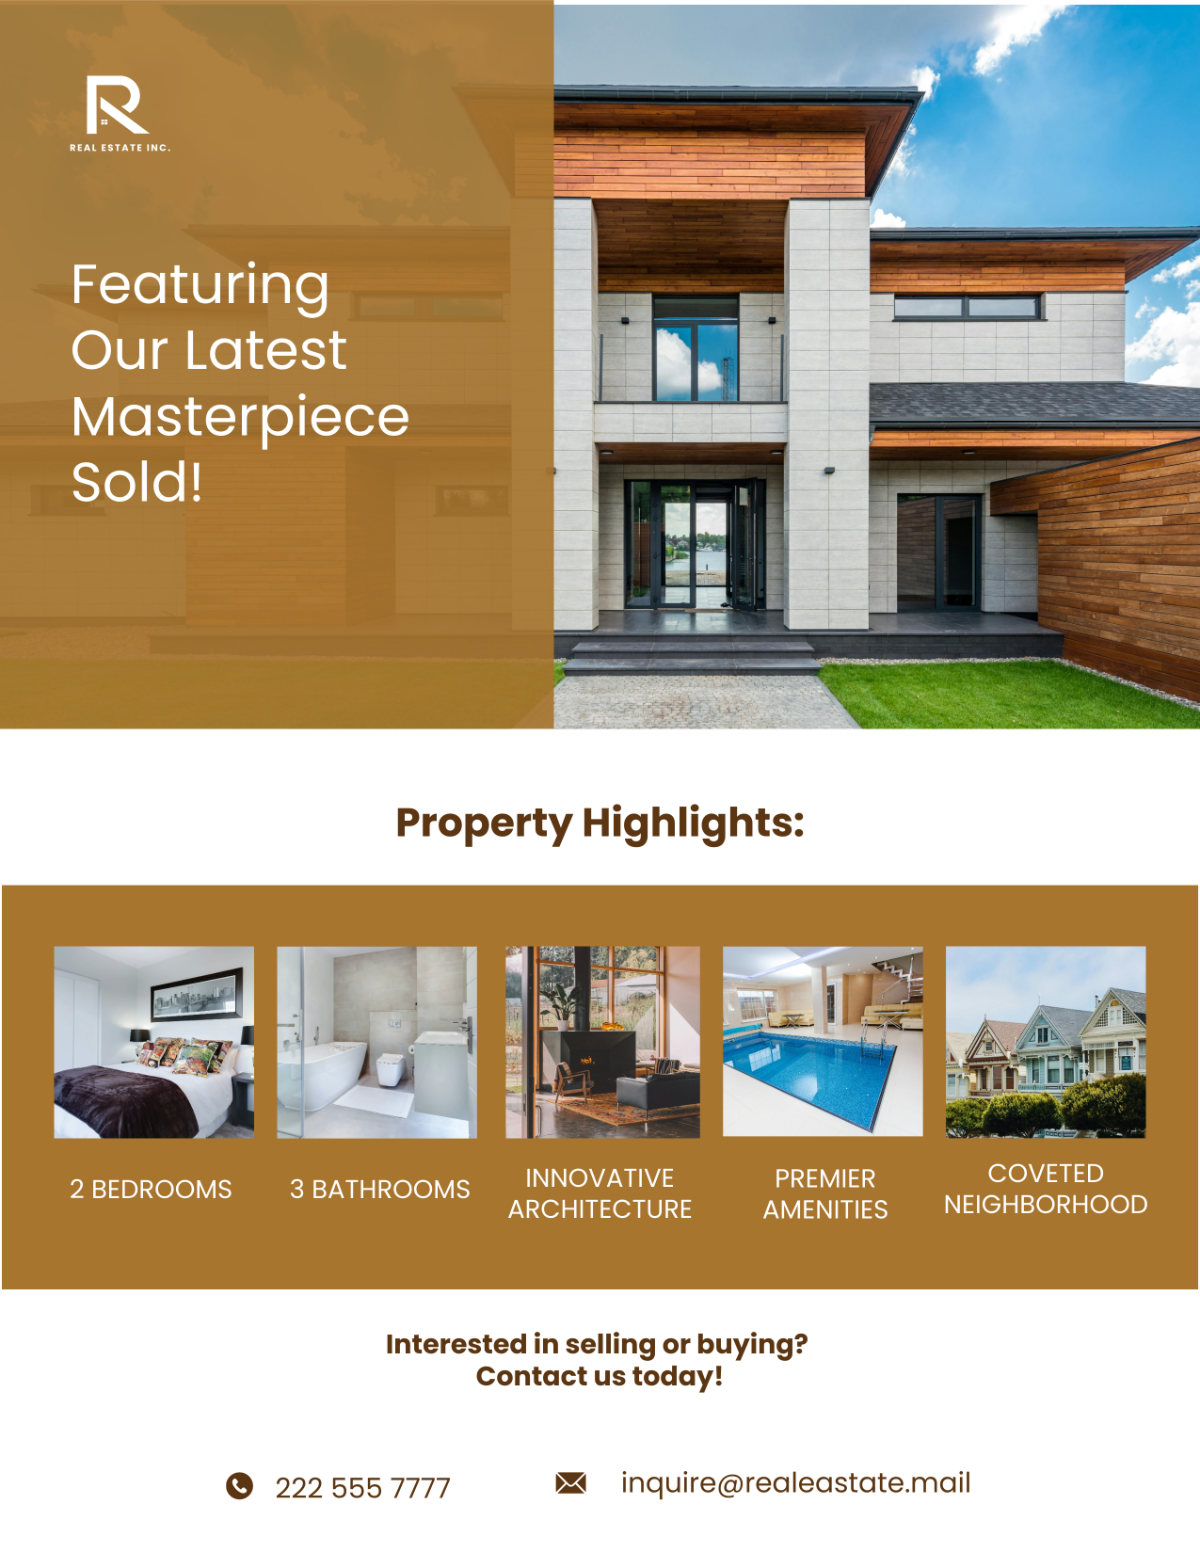 Recently Sold Property Showcase Flyer Template